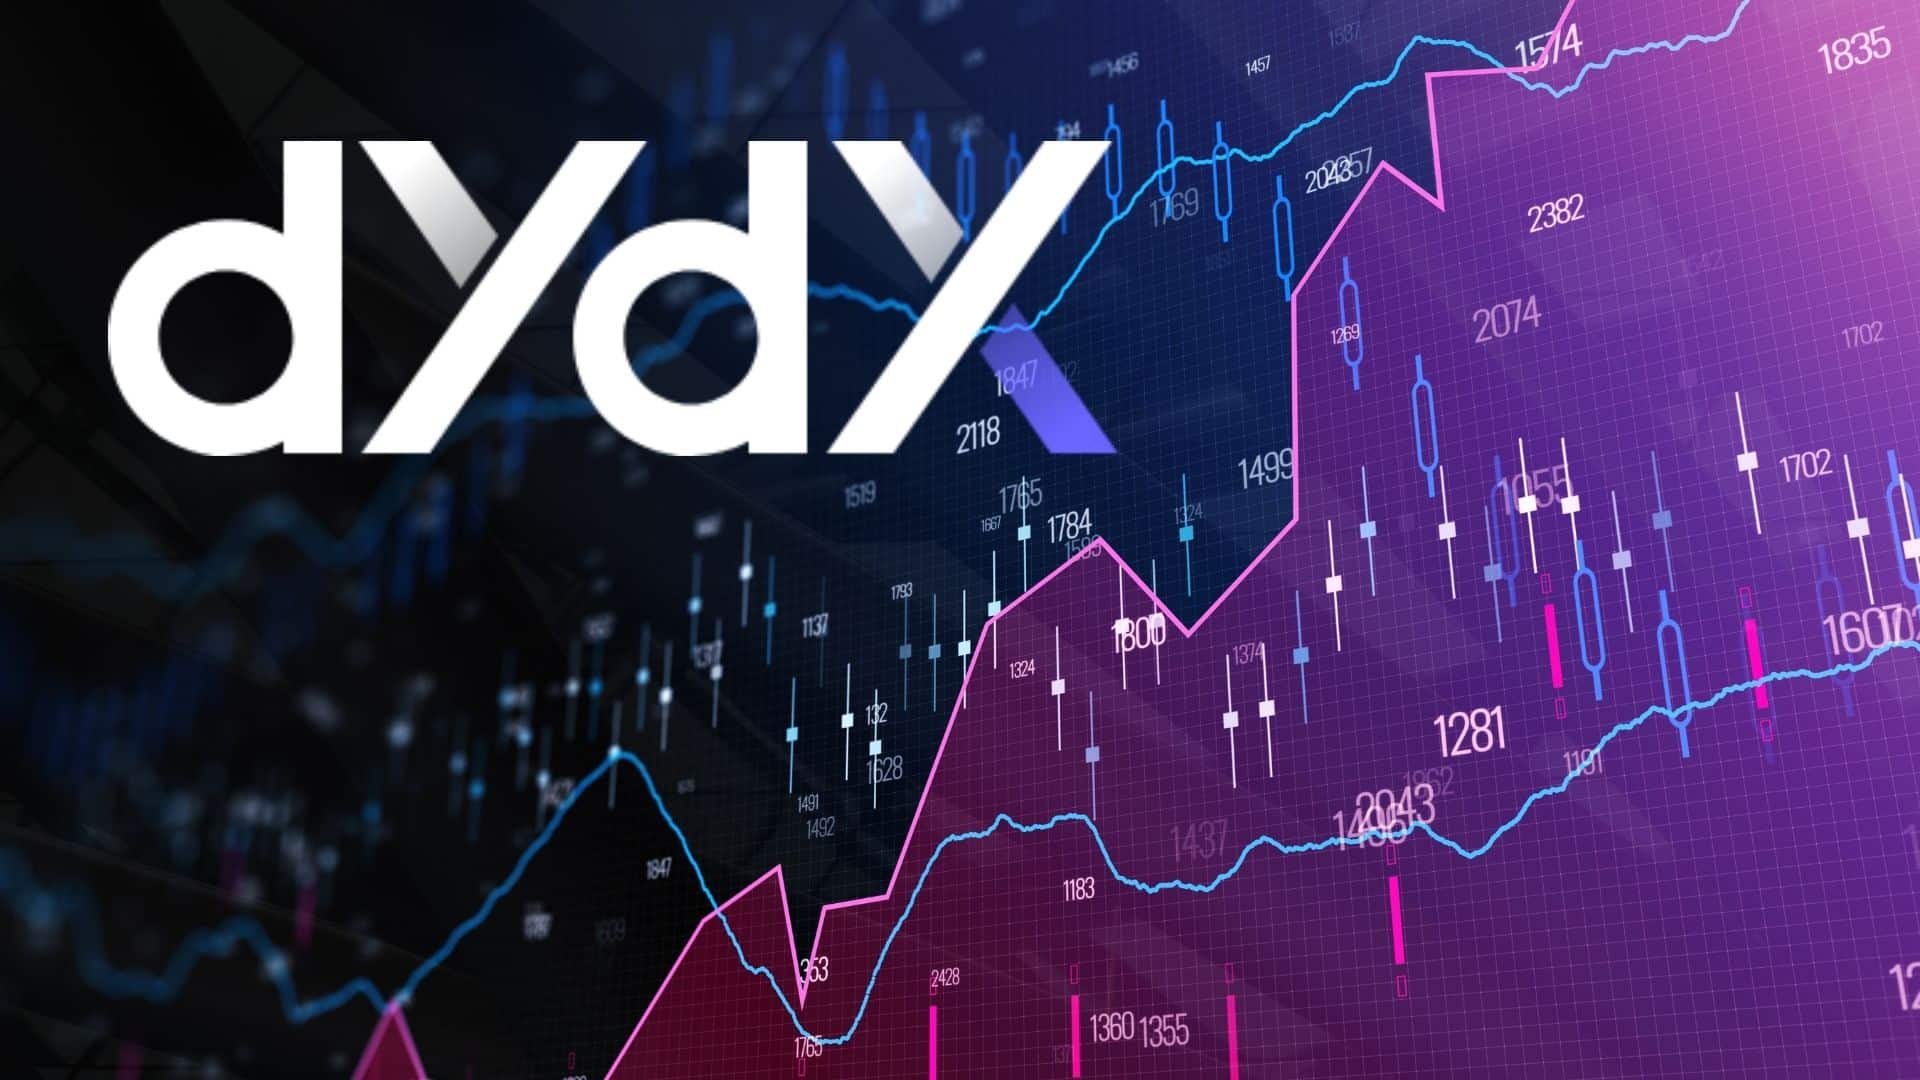 dYdX price surges 80% in a week to all-time high